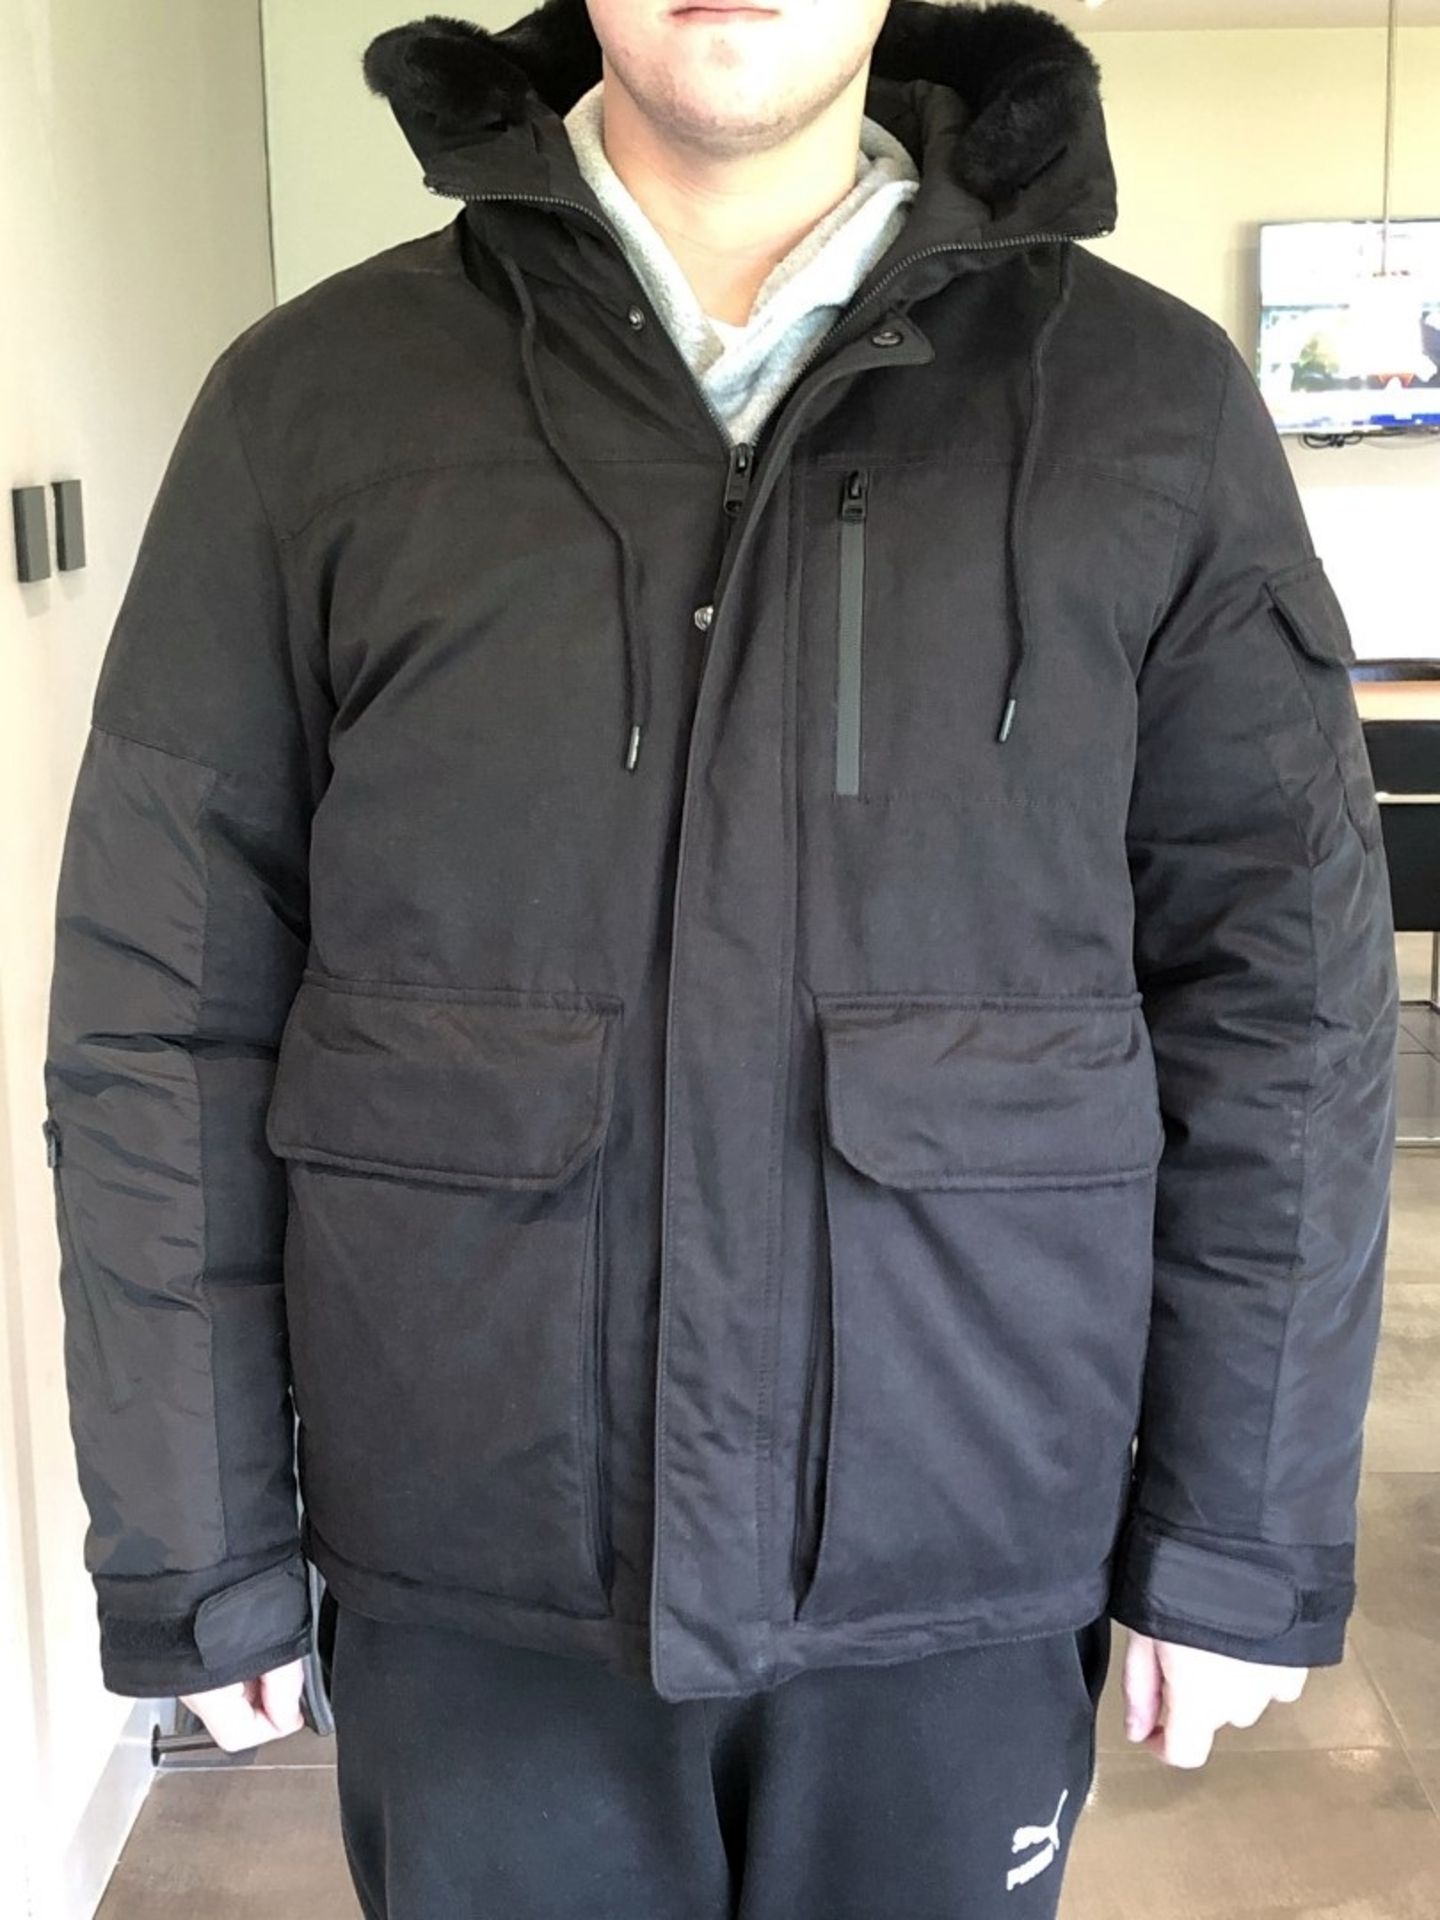 1 x Men's Genuine Zara Coat In Black With A Faux Fur Lined Hood - Size (EU/UK): XL/XL - Preowned -